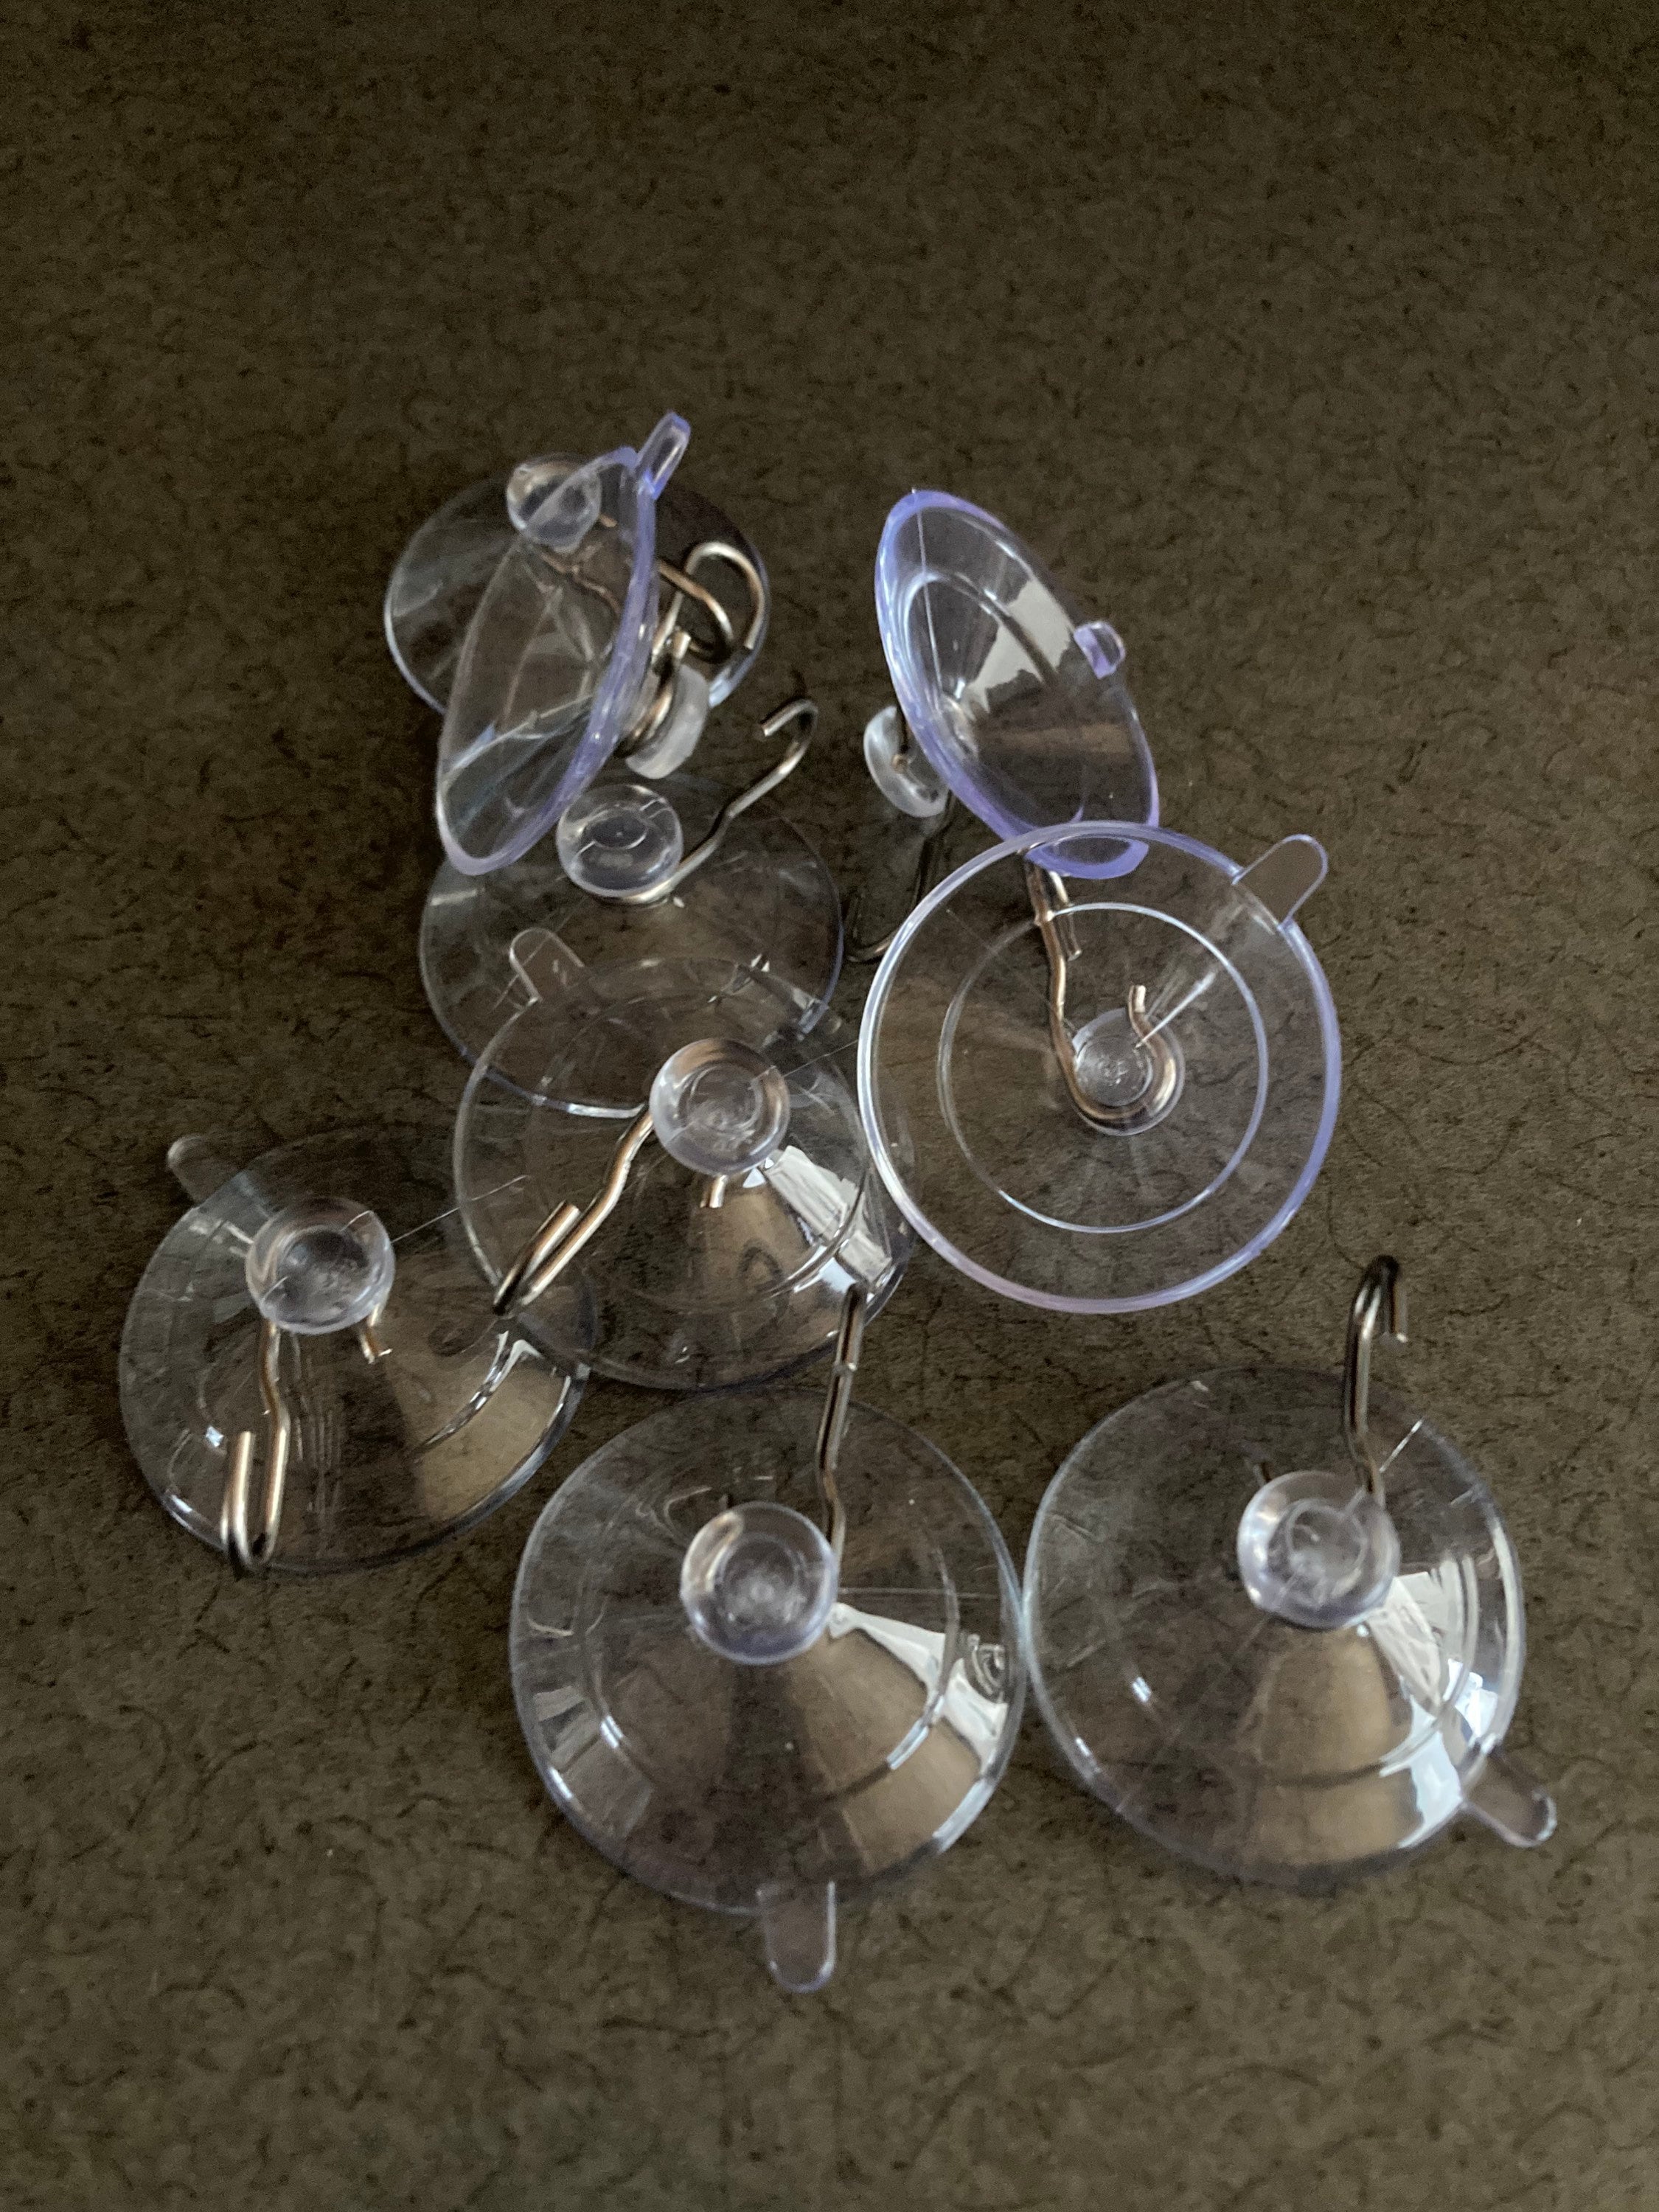 Clear Plastic Suction Cups with Loops, 4.5 cm (1.75 in) Wide, Set of 10,  Christmas